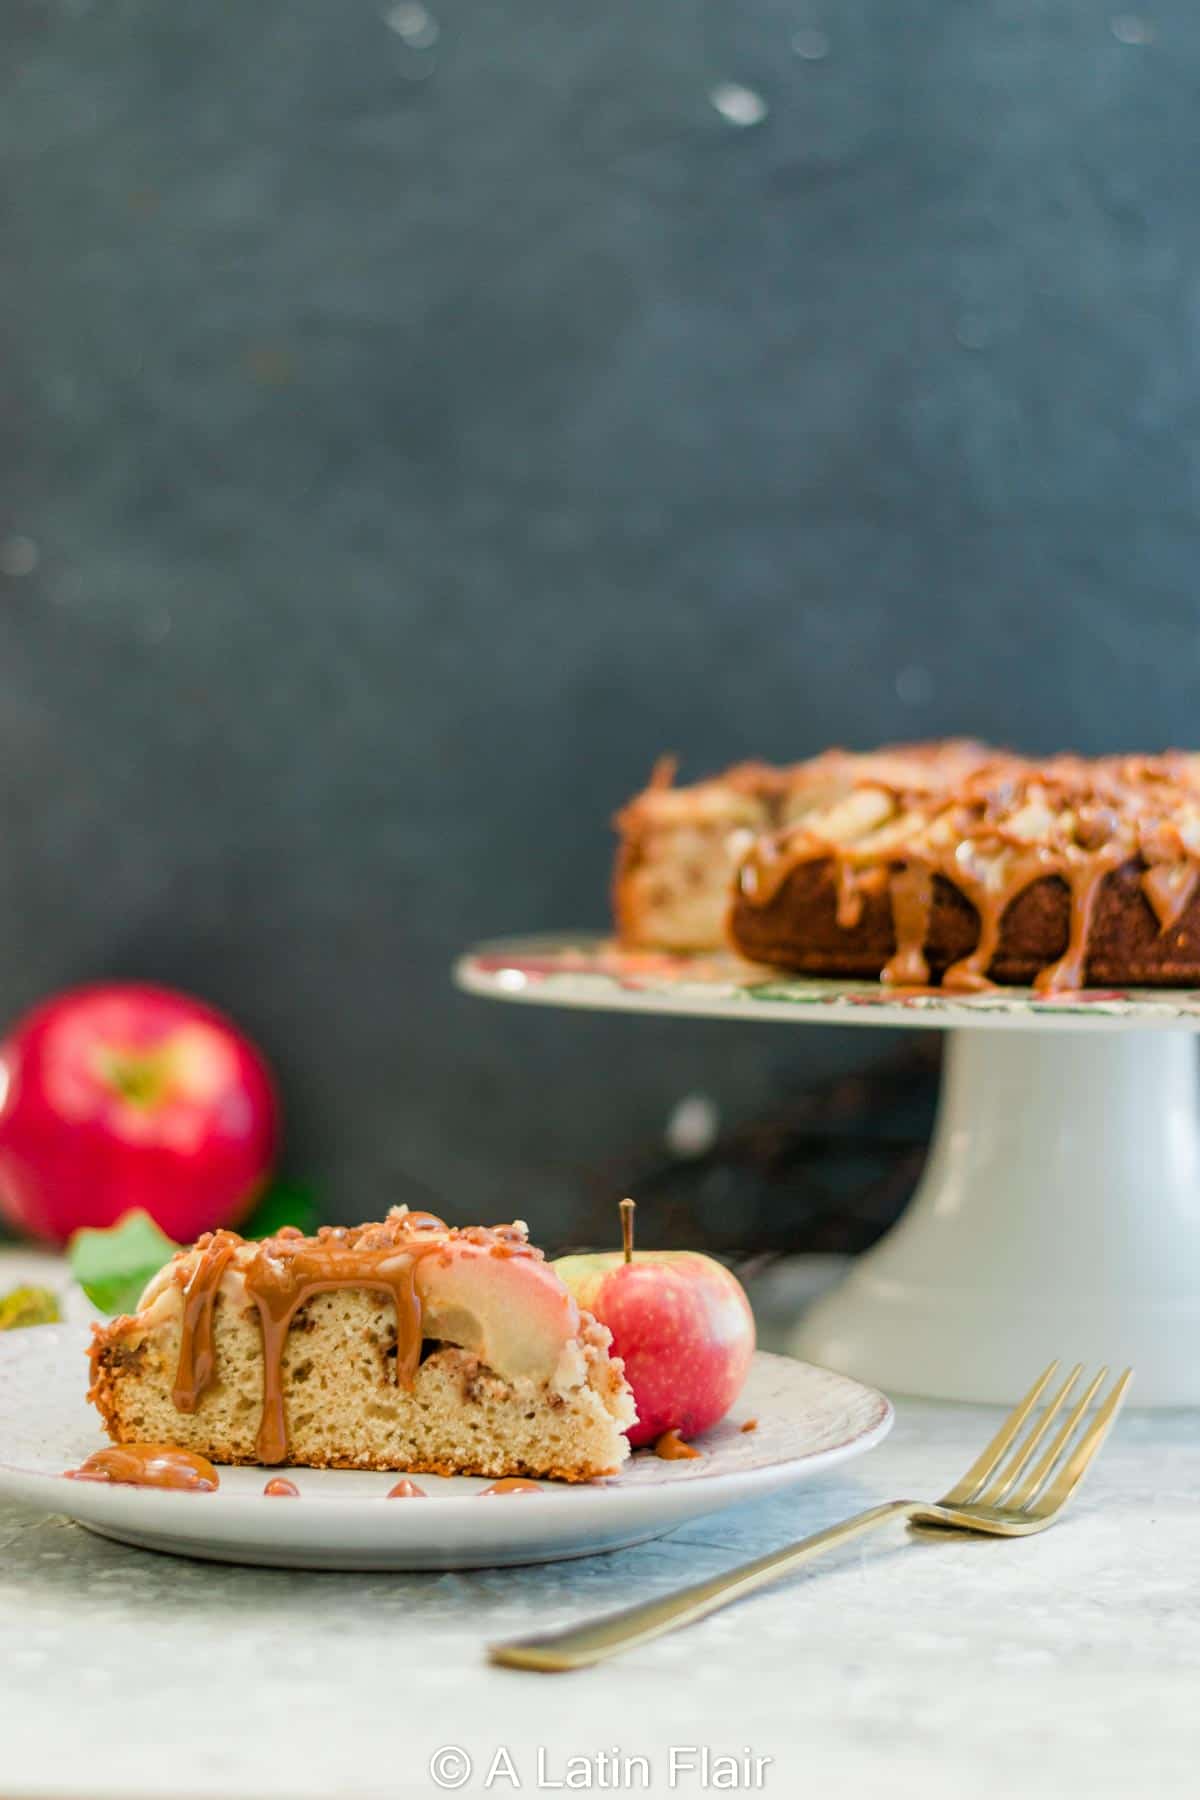 spiced-apple-streusel-cake-drizzled-with-dulce-de-leche-served-on-white-plate